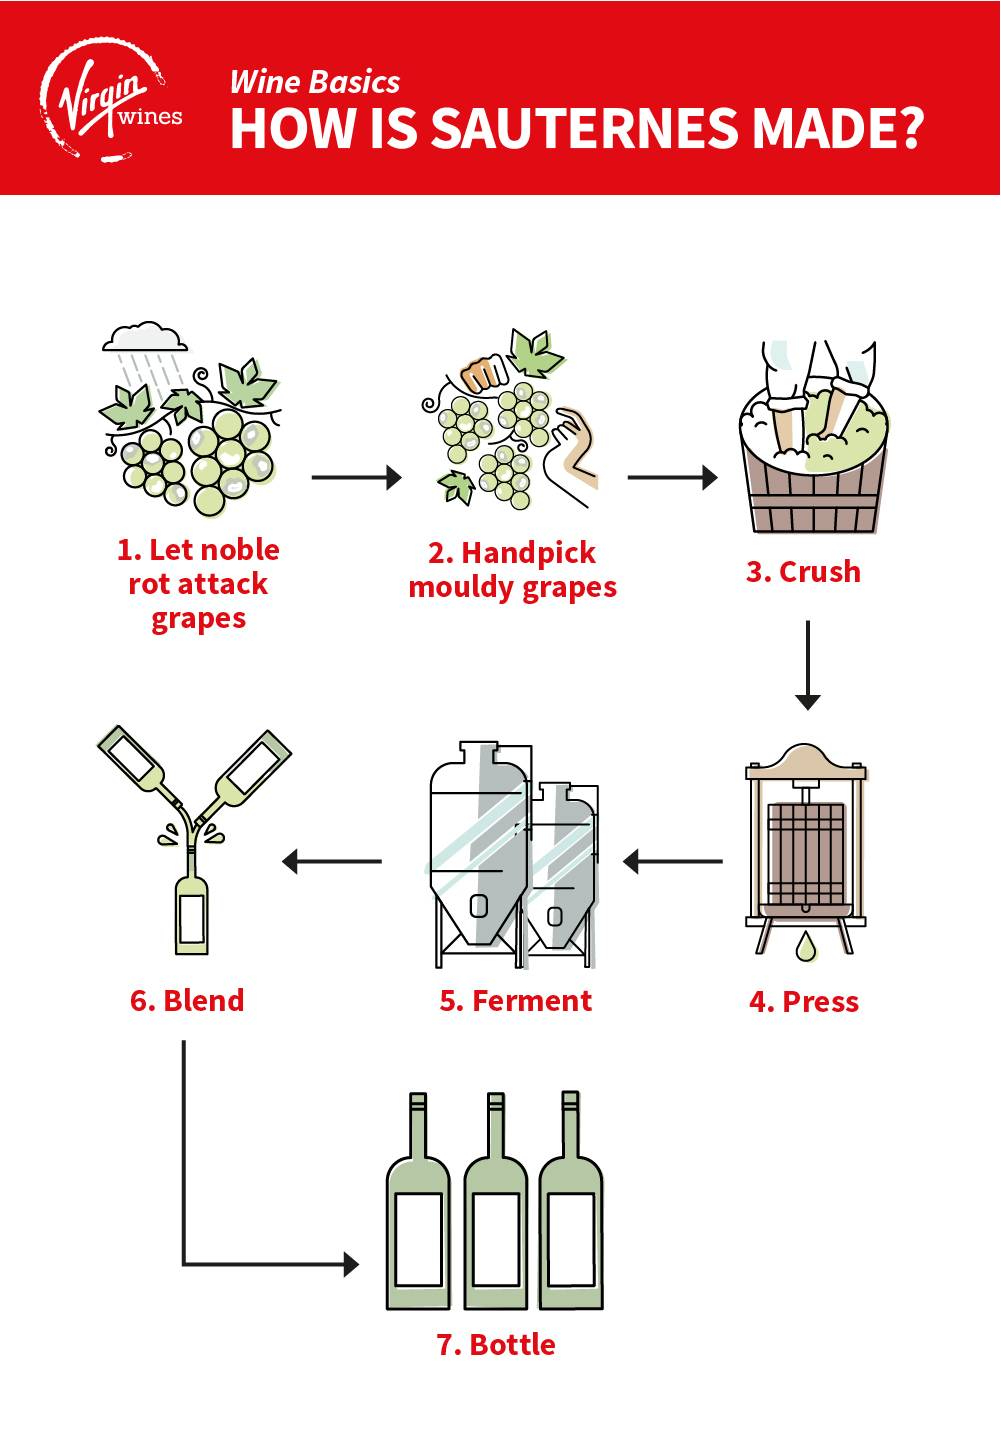 Infographic by Virgin Wines showing how Sauternes is made